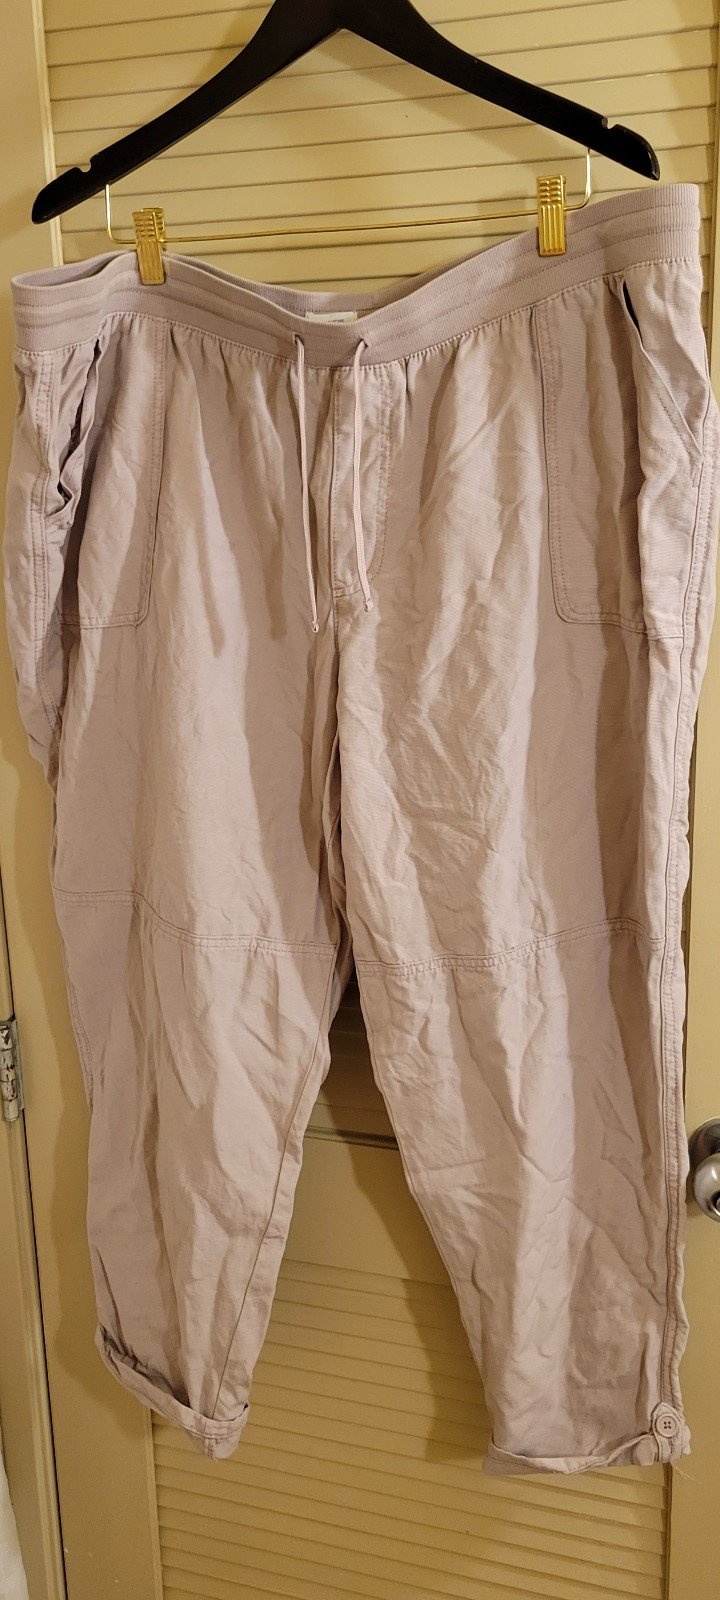 Personality Maurices size 22w light lavendar joggers lu5OuJUc8 hot sale